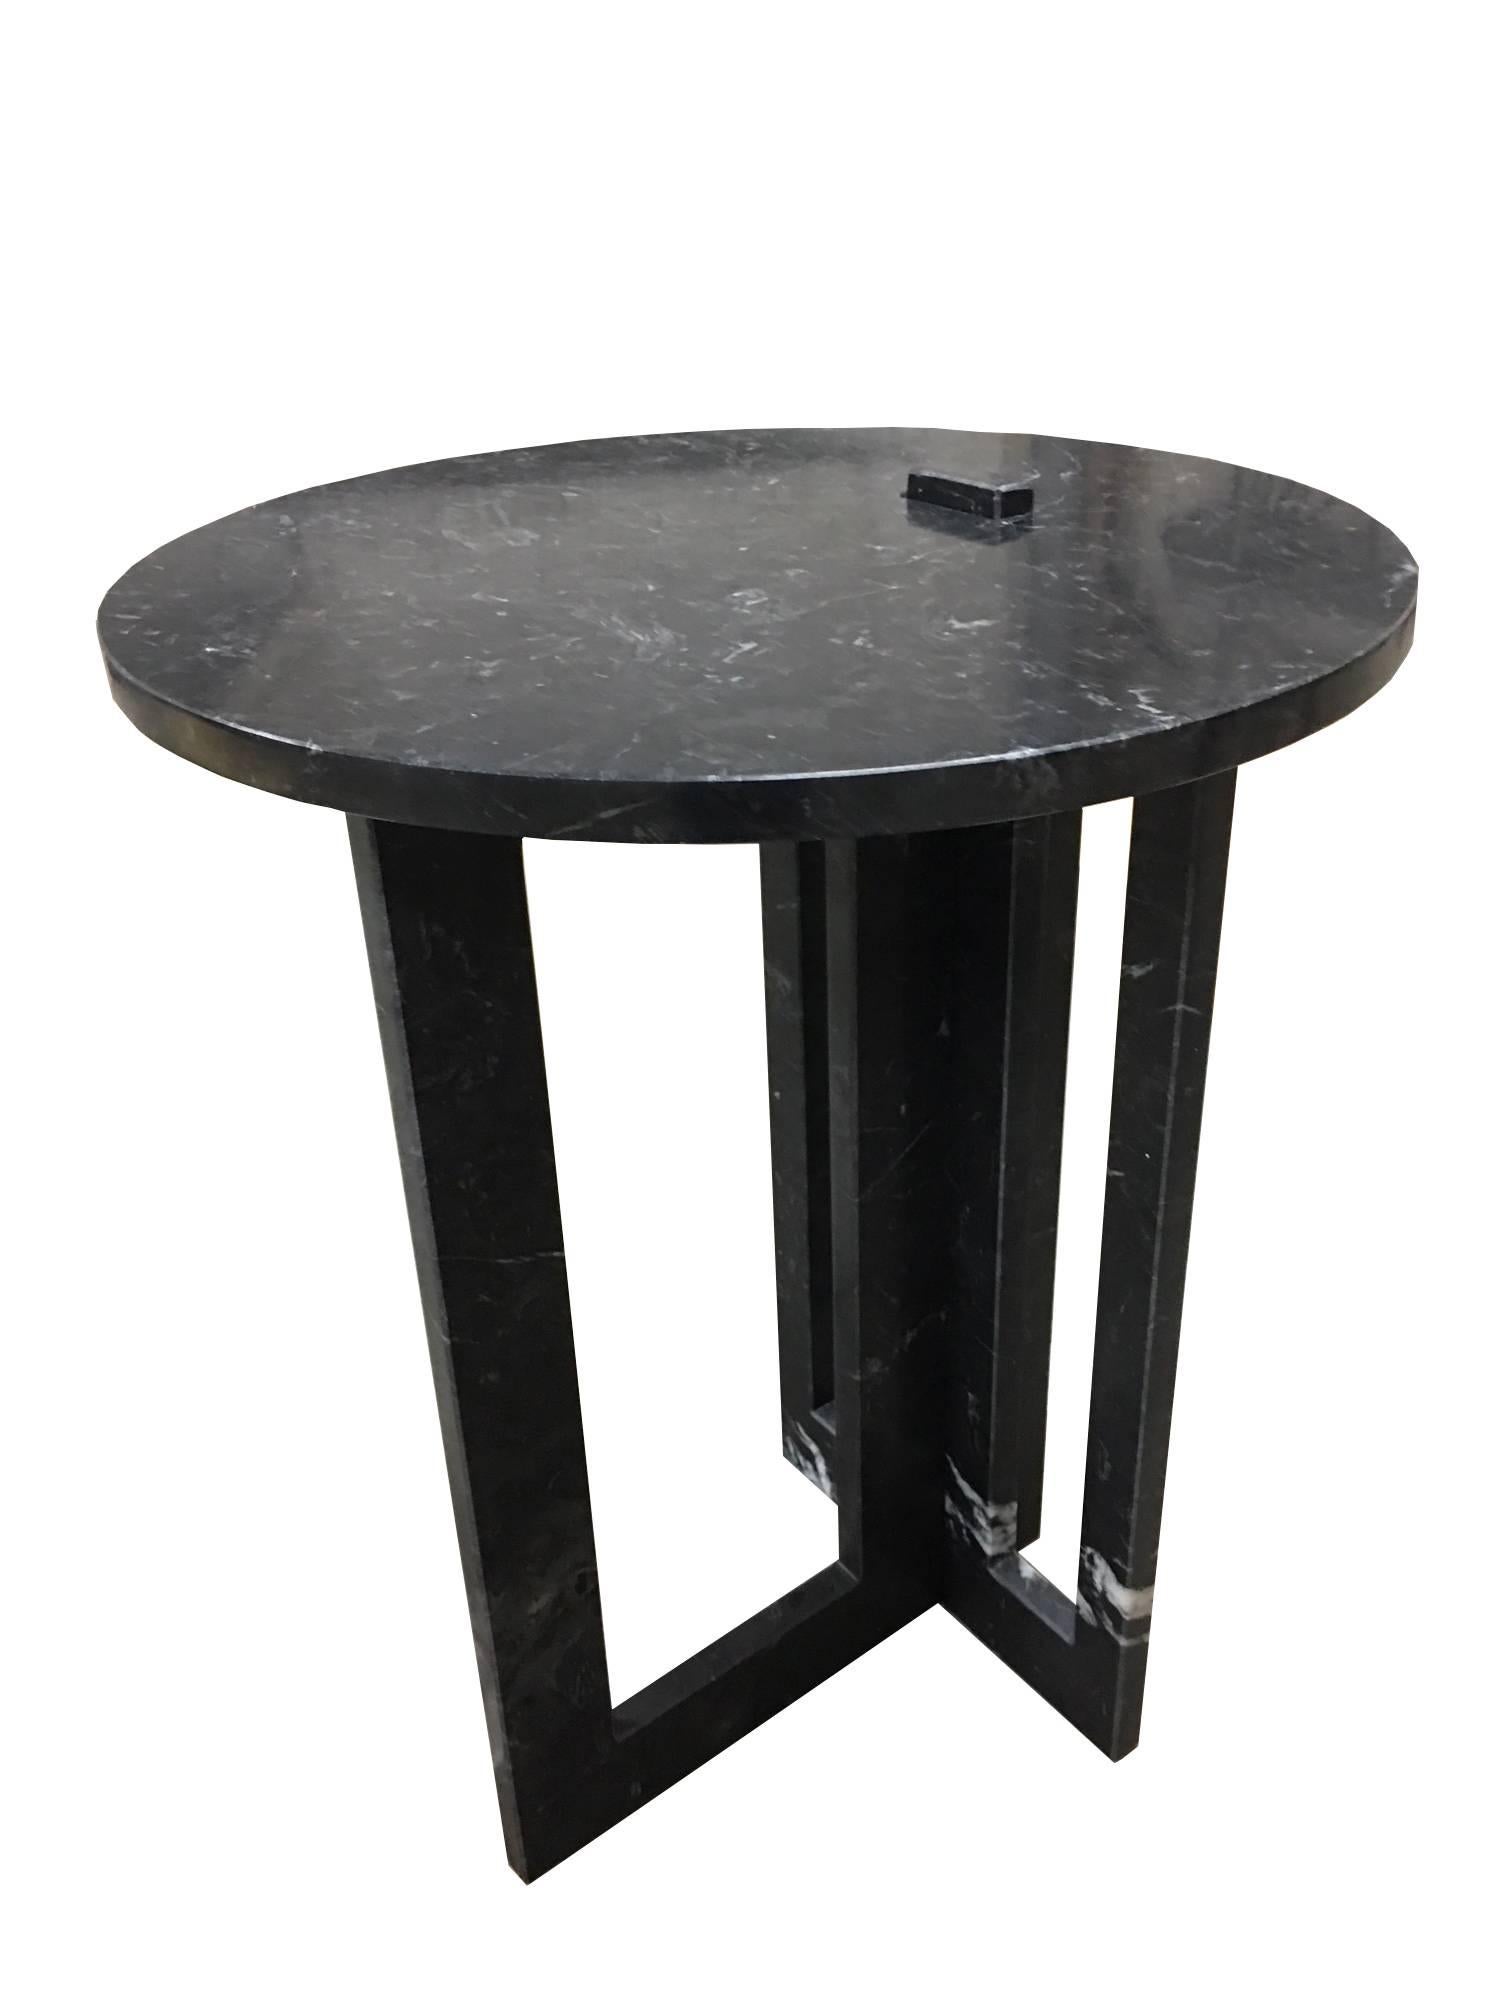 Hand-Crafted Pair of Italian Modern Black Marble Side Tables by Massimo Mangiardi